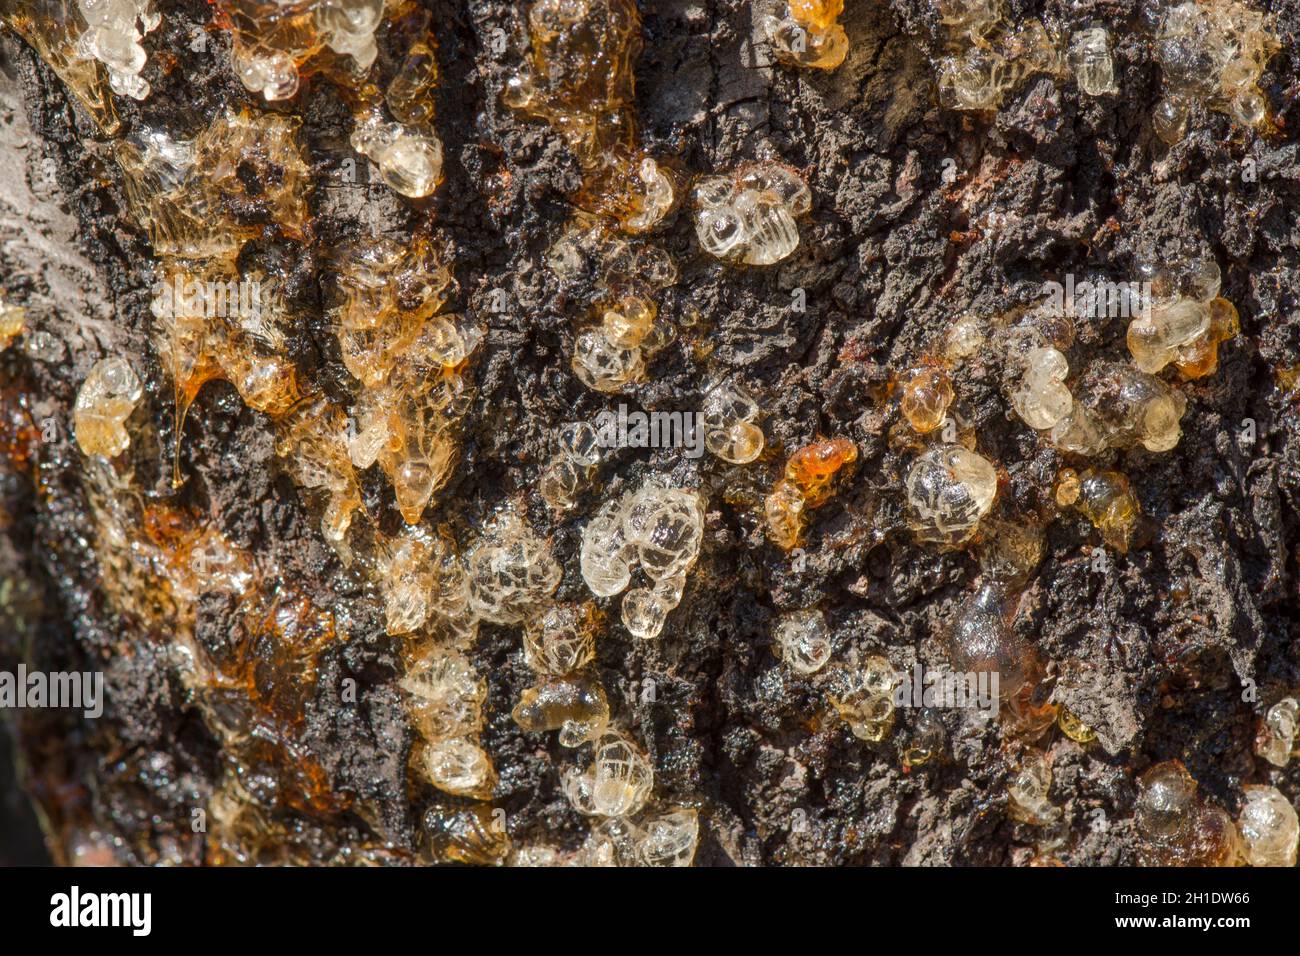 Almond tree oozing sap from bark due to fungal disease, weakened by Hot, dry conditions, Spain. Stock Photo